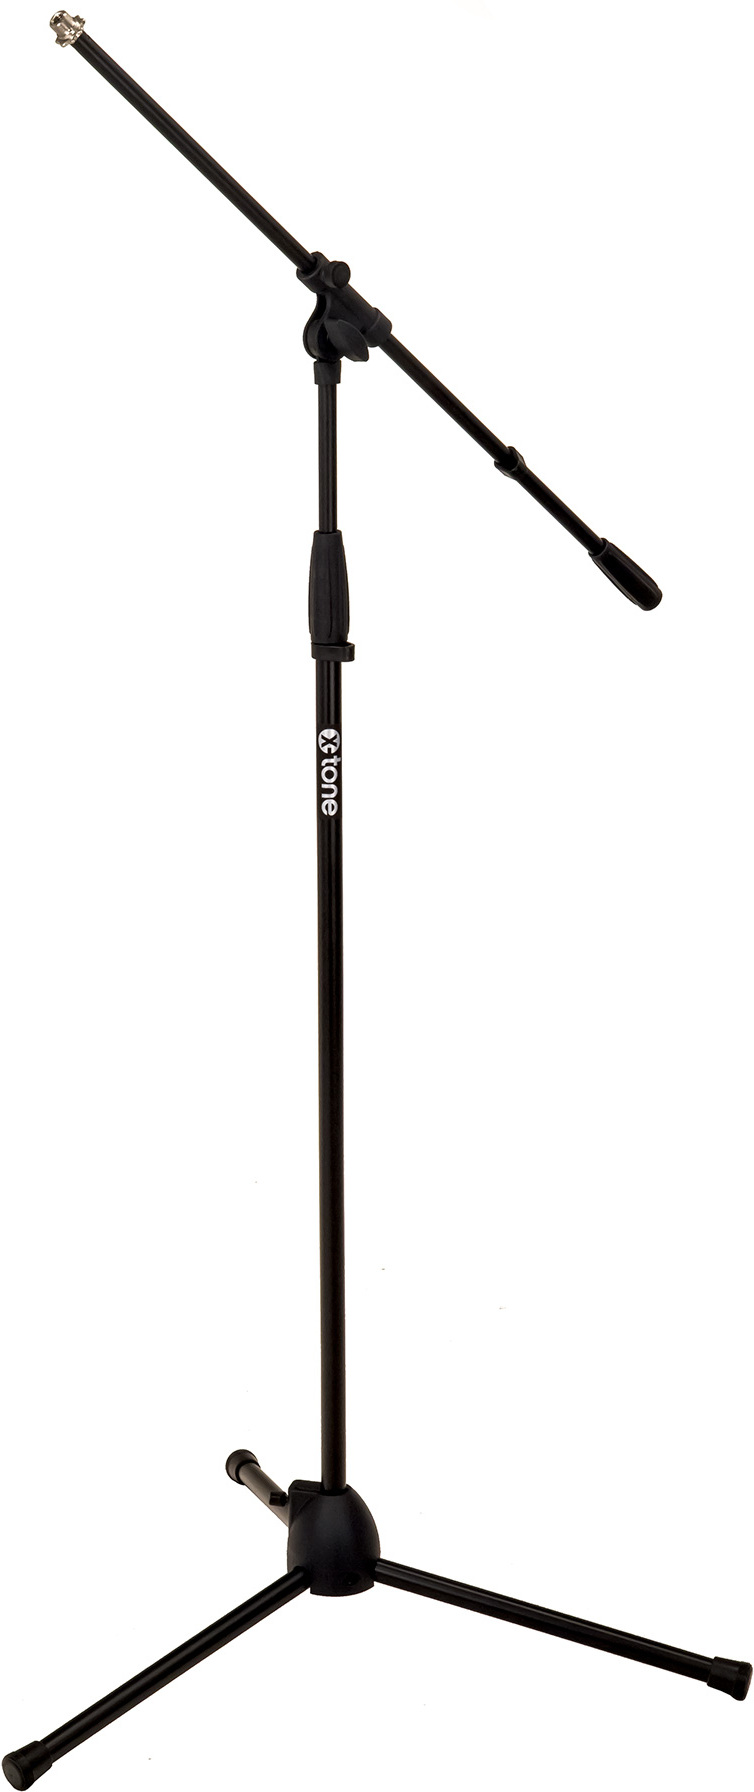 X-tone Xh 6000 Pied Micro - Microphone stand - Main picture